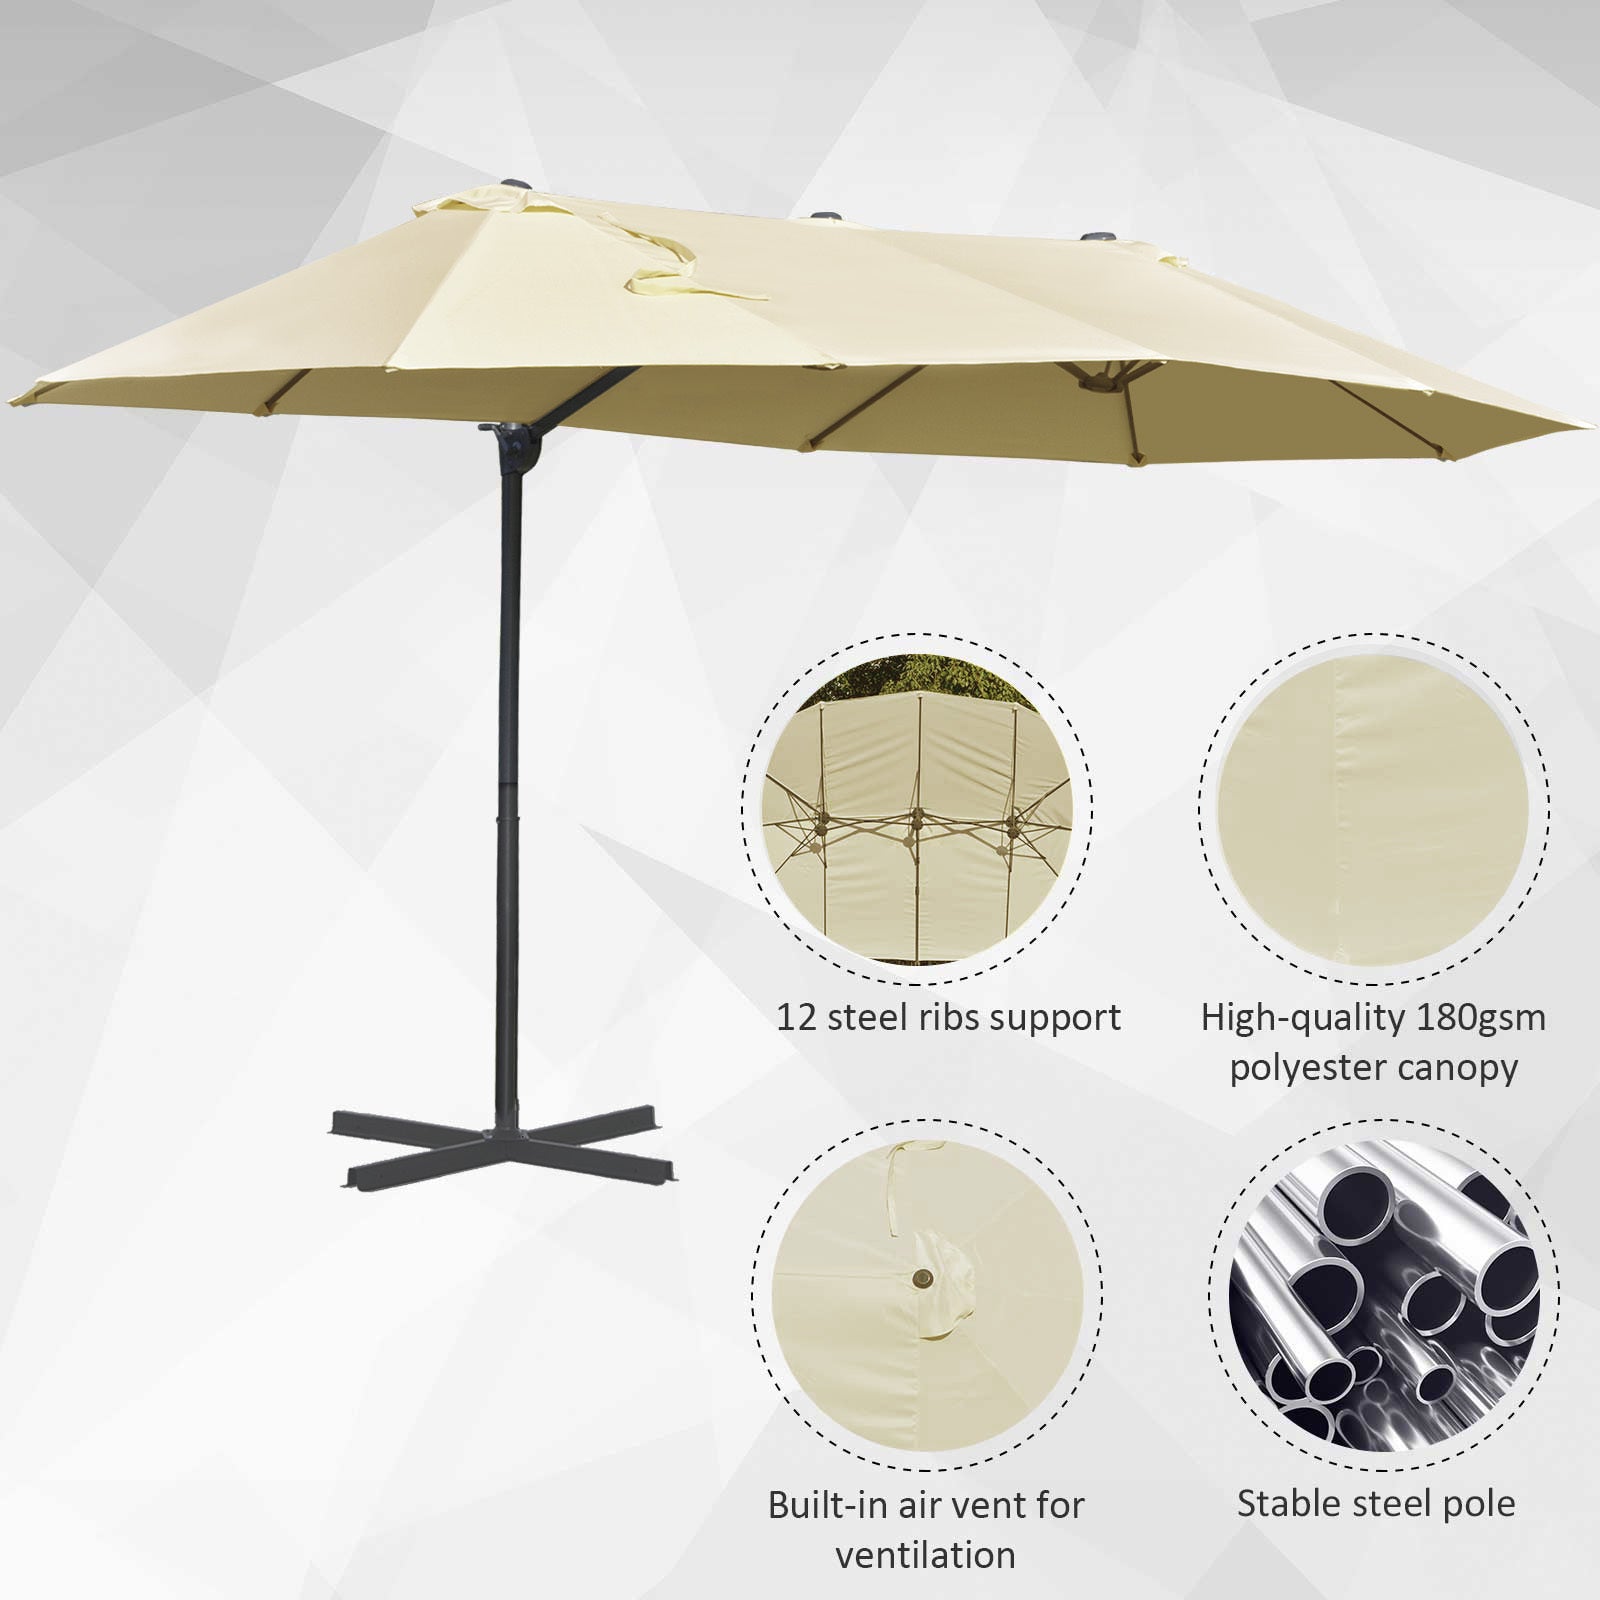 14ft Patio Umbrella Double-Sided Outdoor Market Extra Large Umbrella with Crank, Cross Base for Deck, Lawn, Backyard and Pool, Off-White